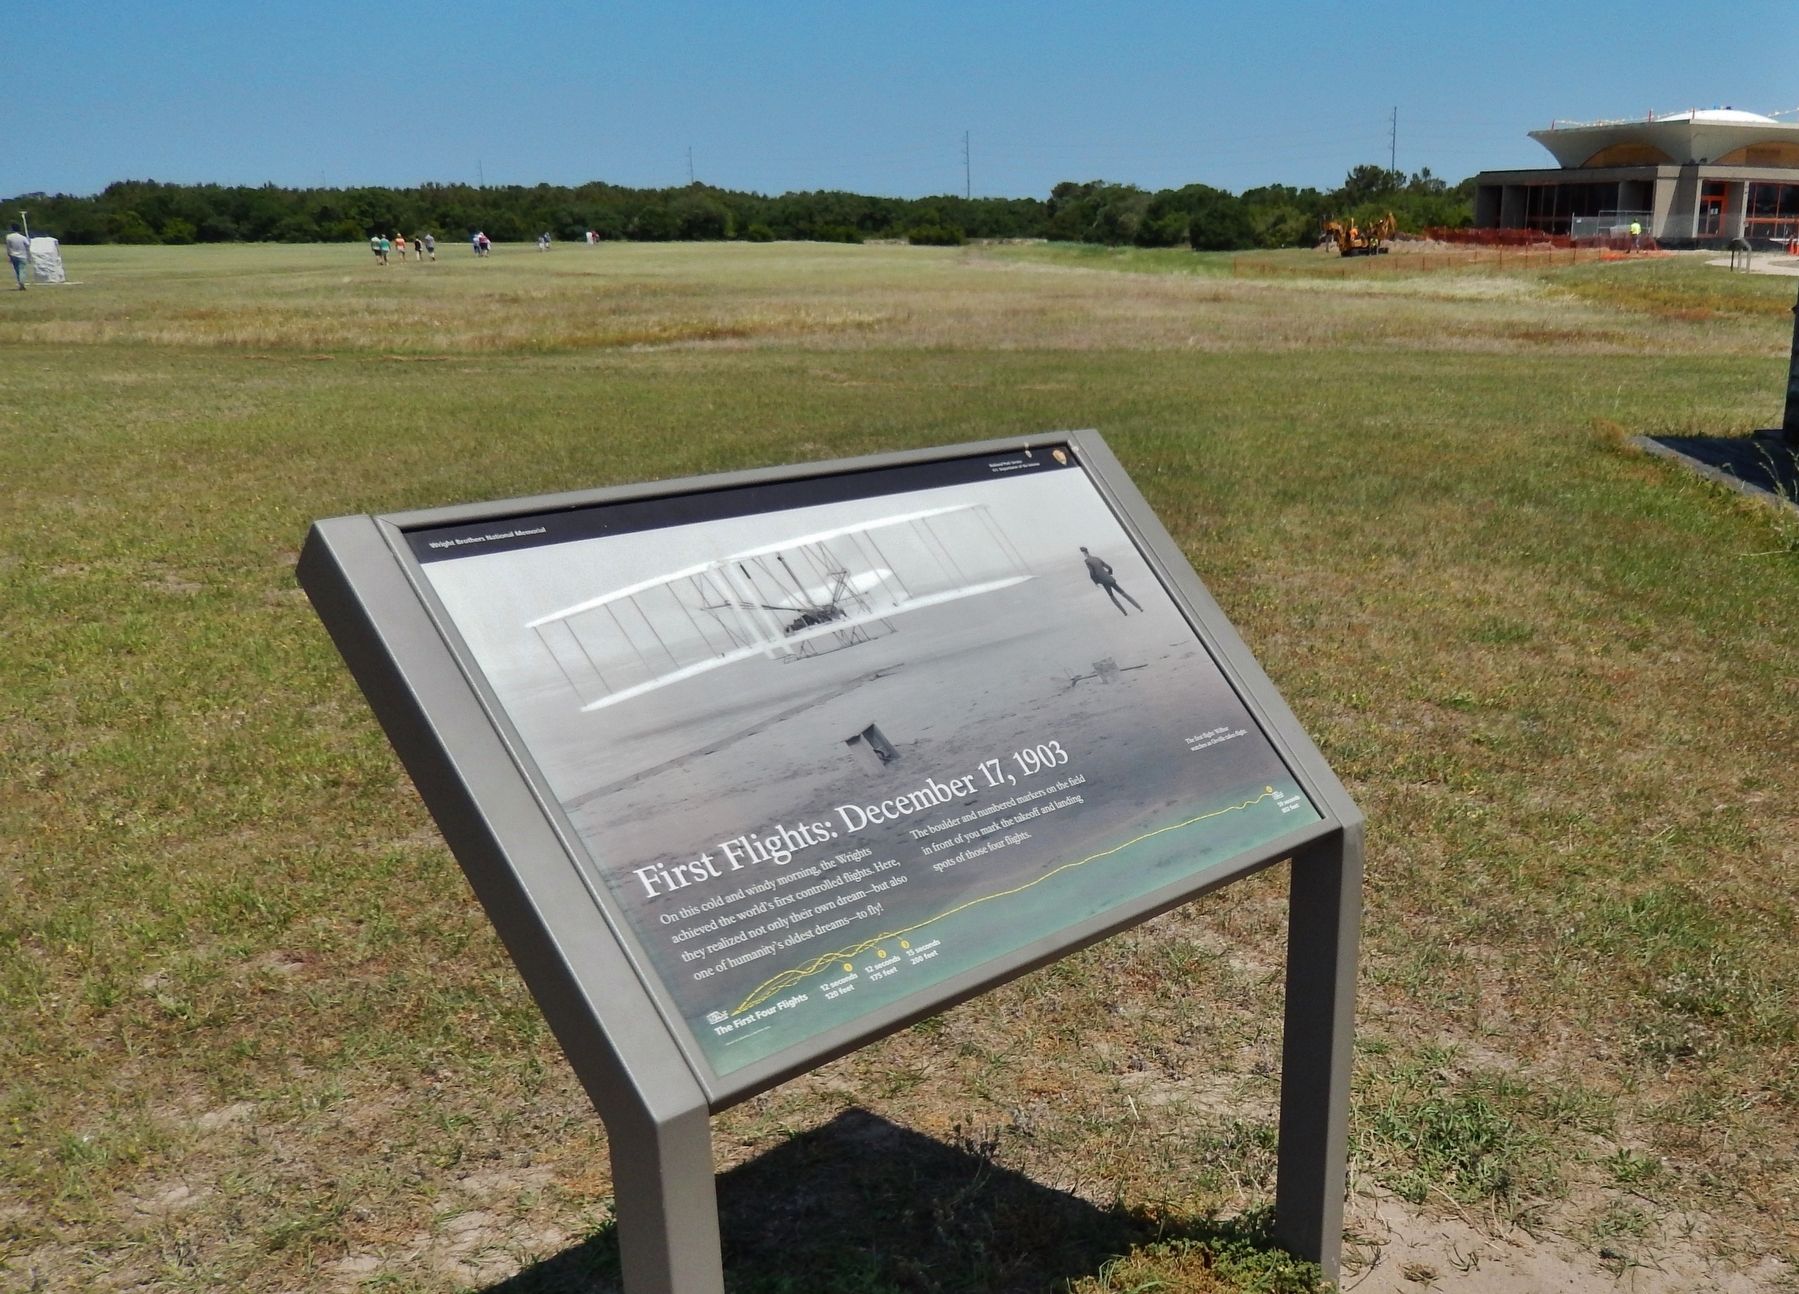 First Flights: December 17th, 1903 Marker (<i>wide view</i>) image. Click for full size.